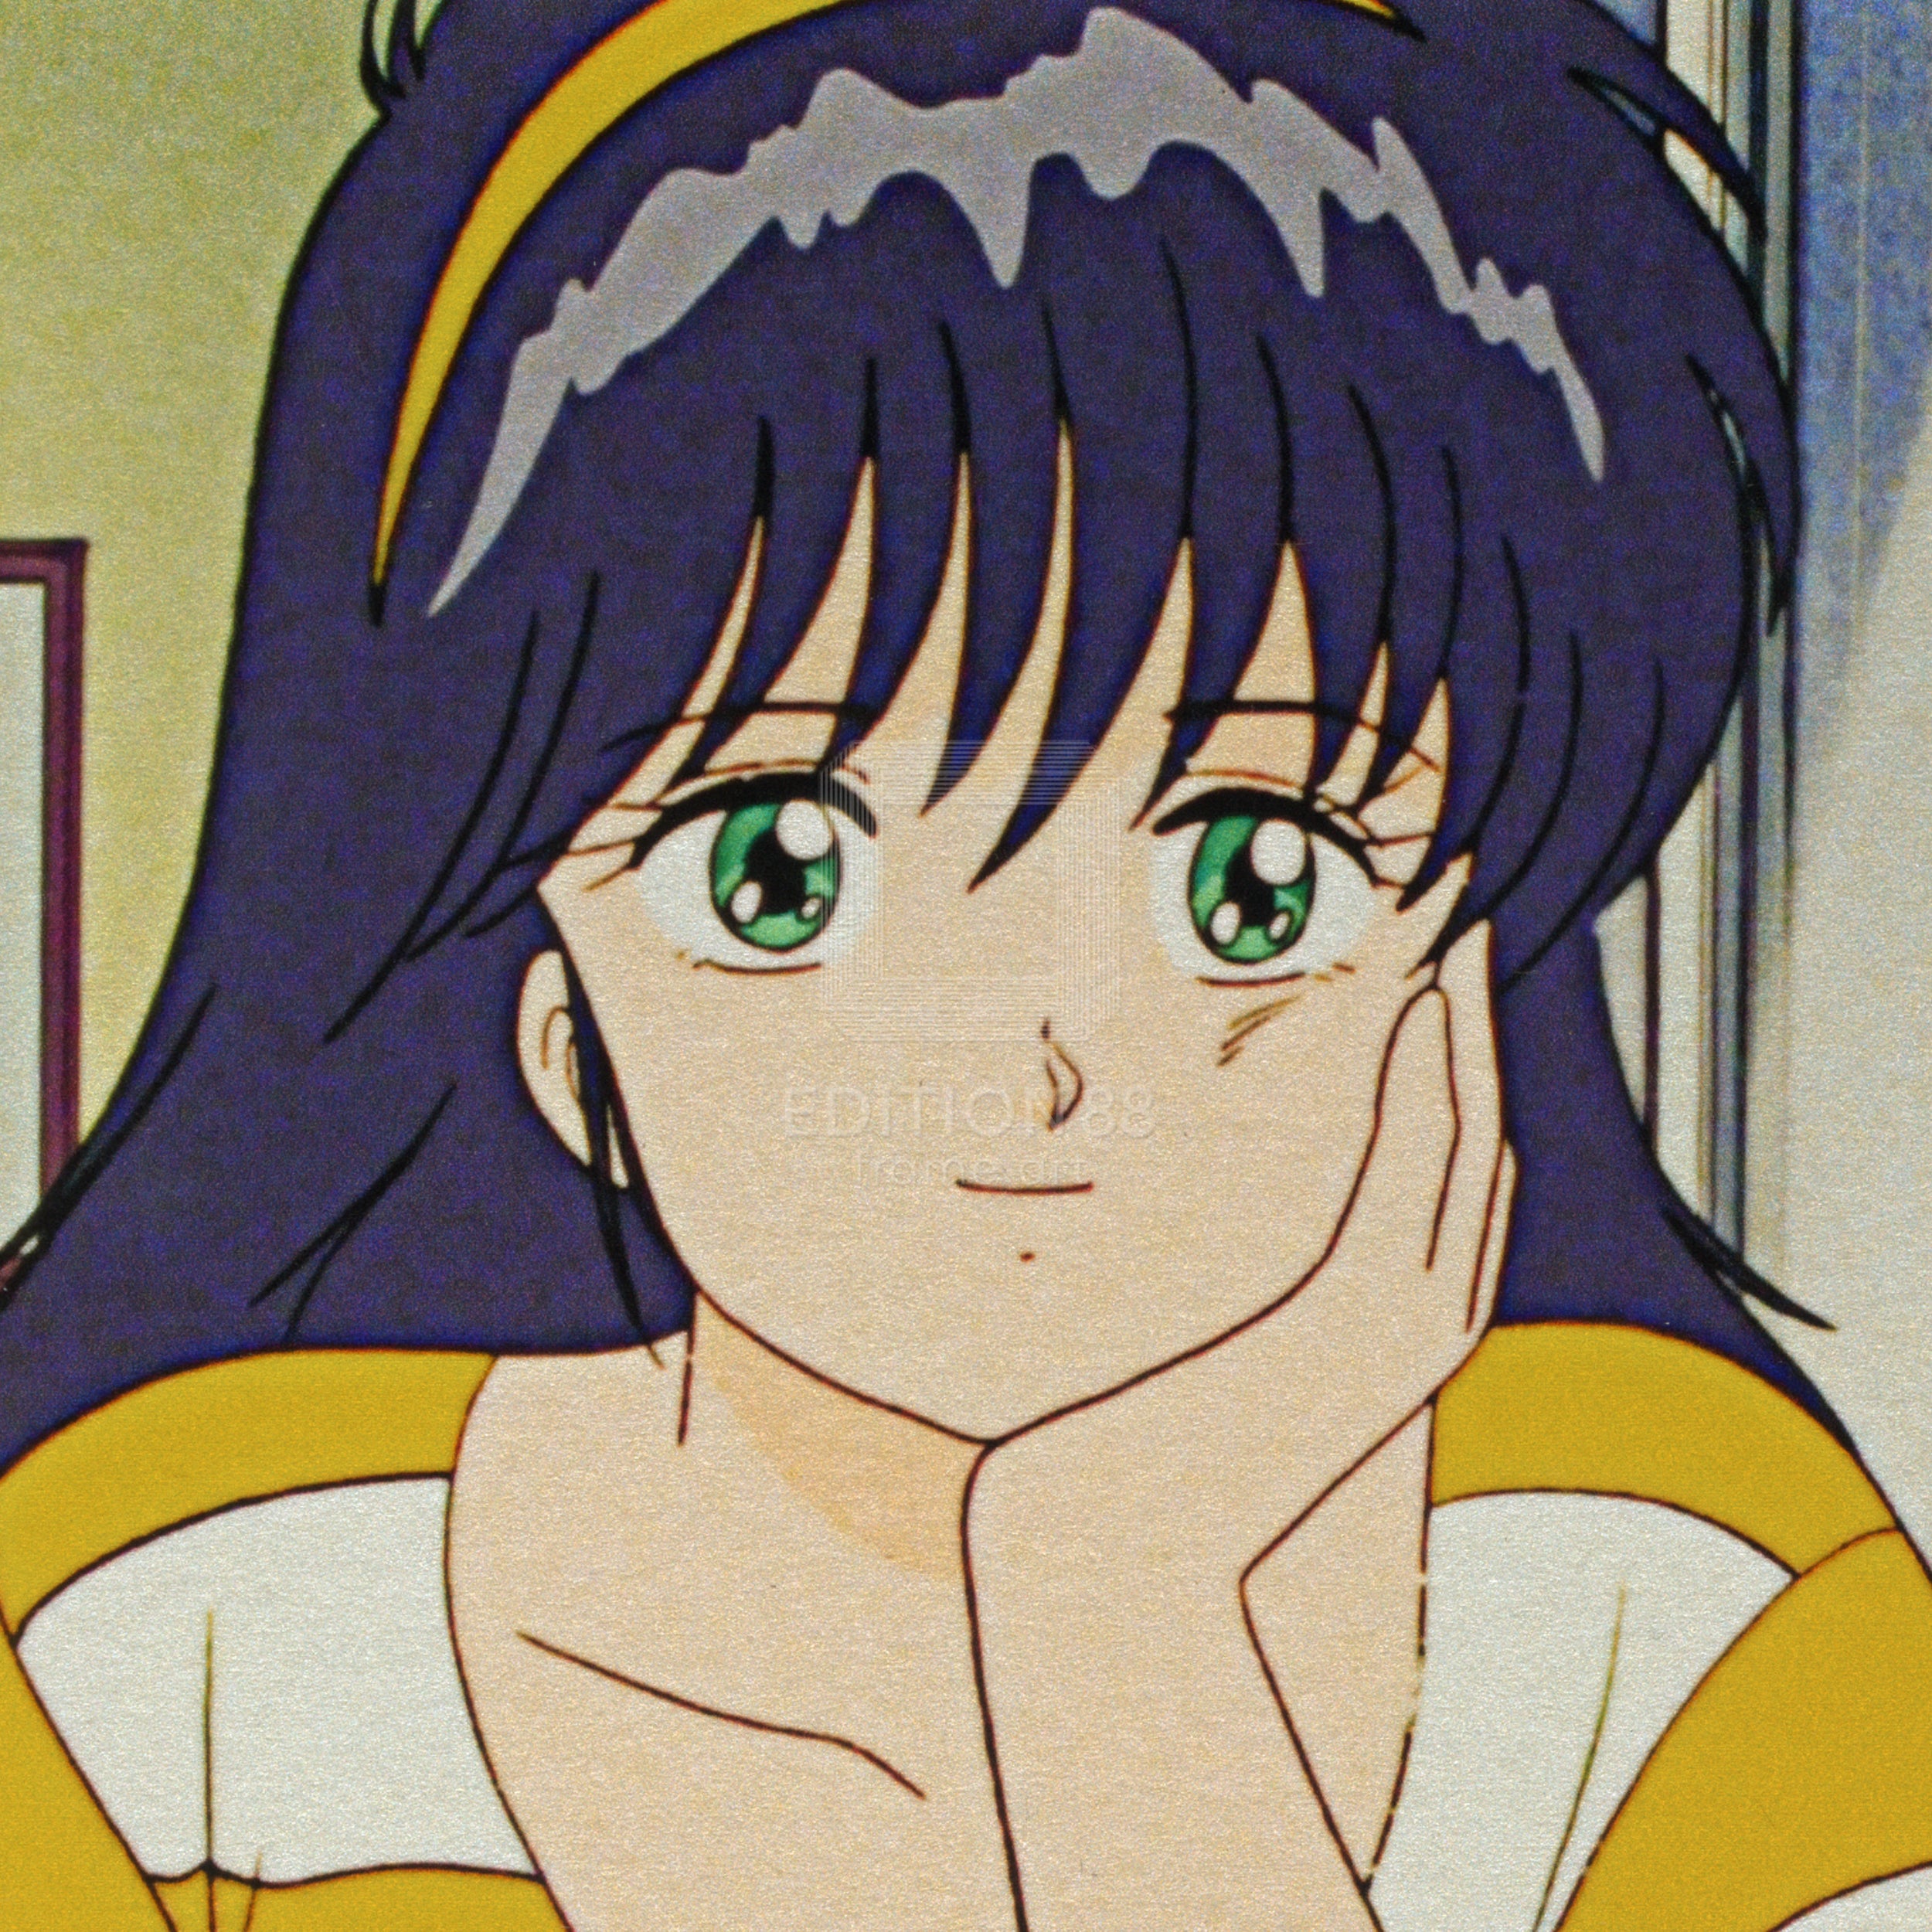 Kimagure Orange Road, 88Filmgraph #1, Episode3 -Feelings Stirred – The Rolling First-Date